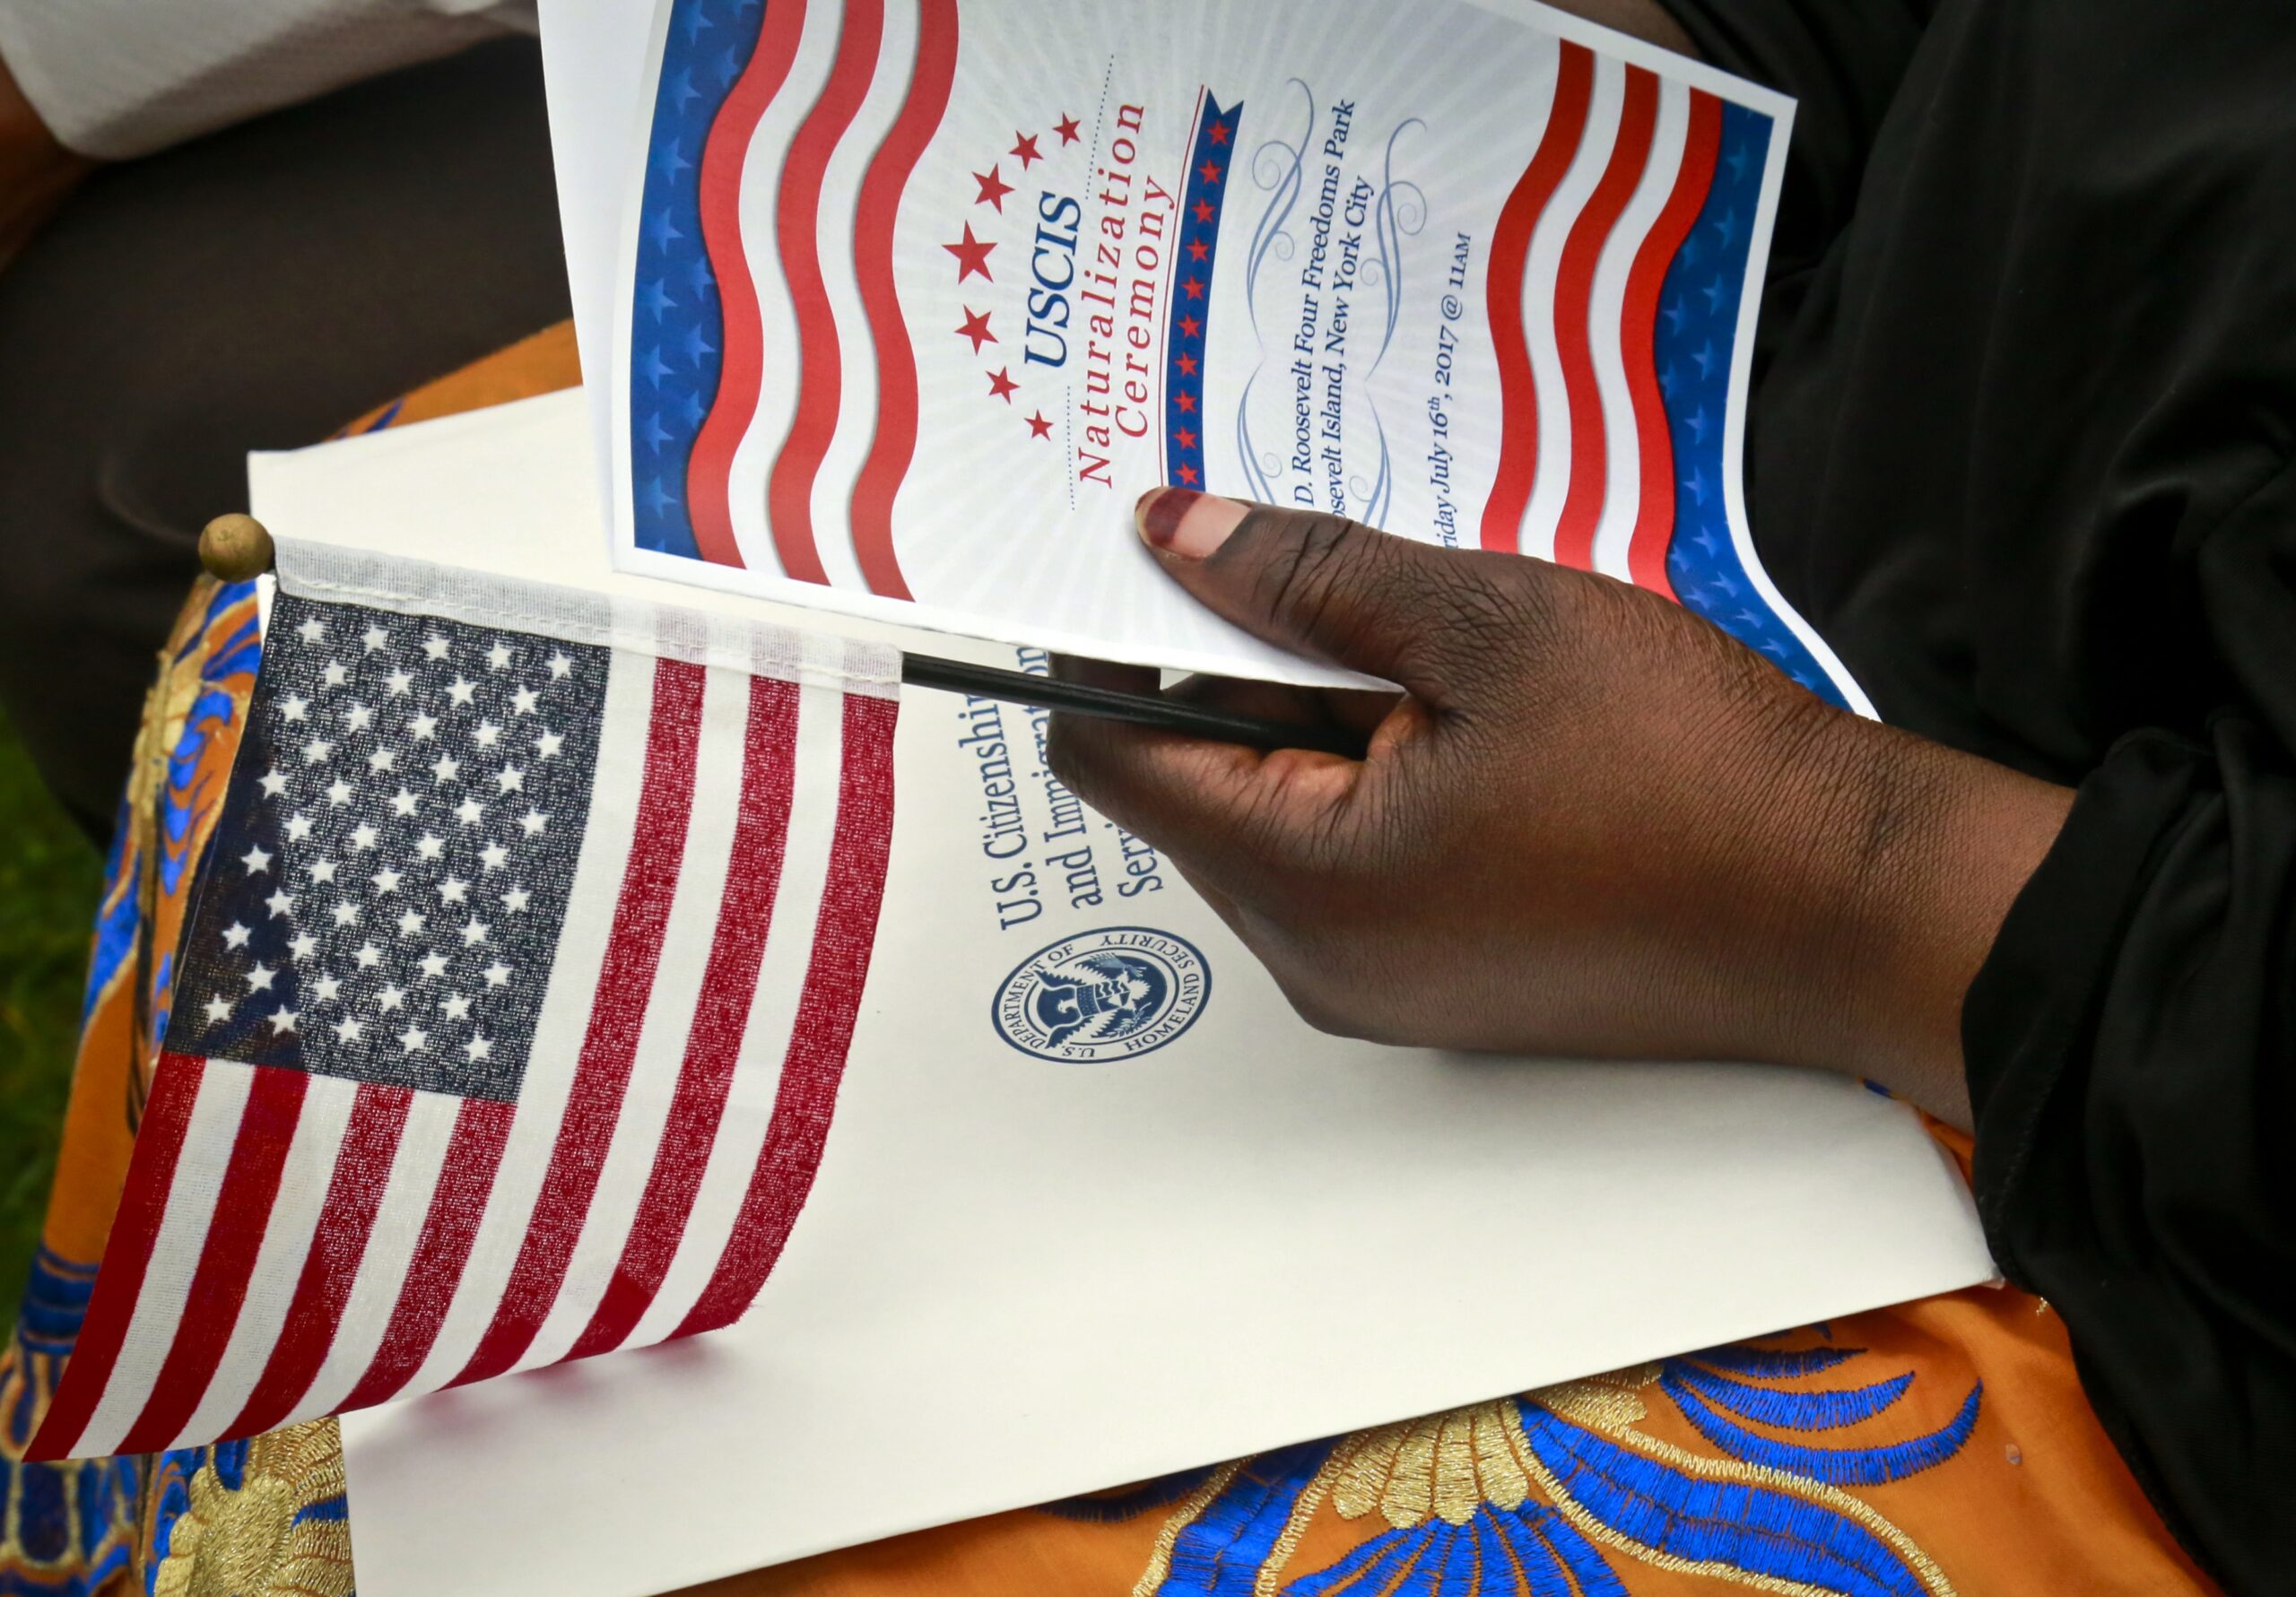 Fatoumata Jangana holds a program and flag during U.S. Citizen and Immigration Services ceremony